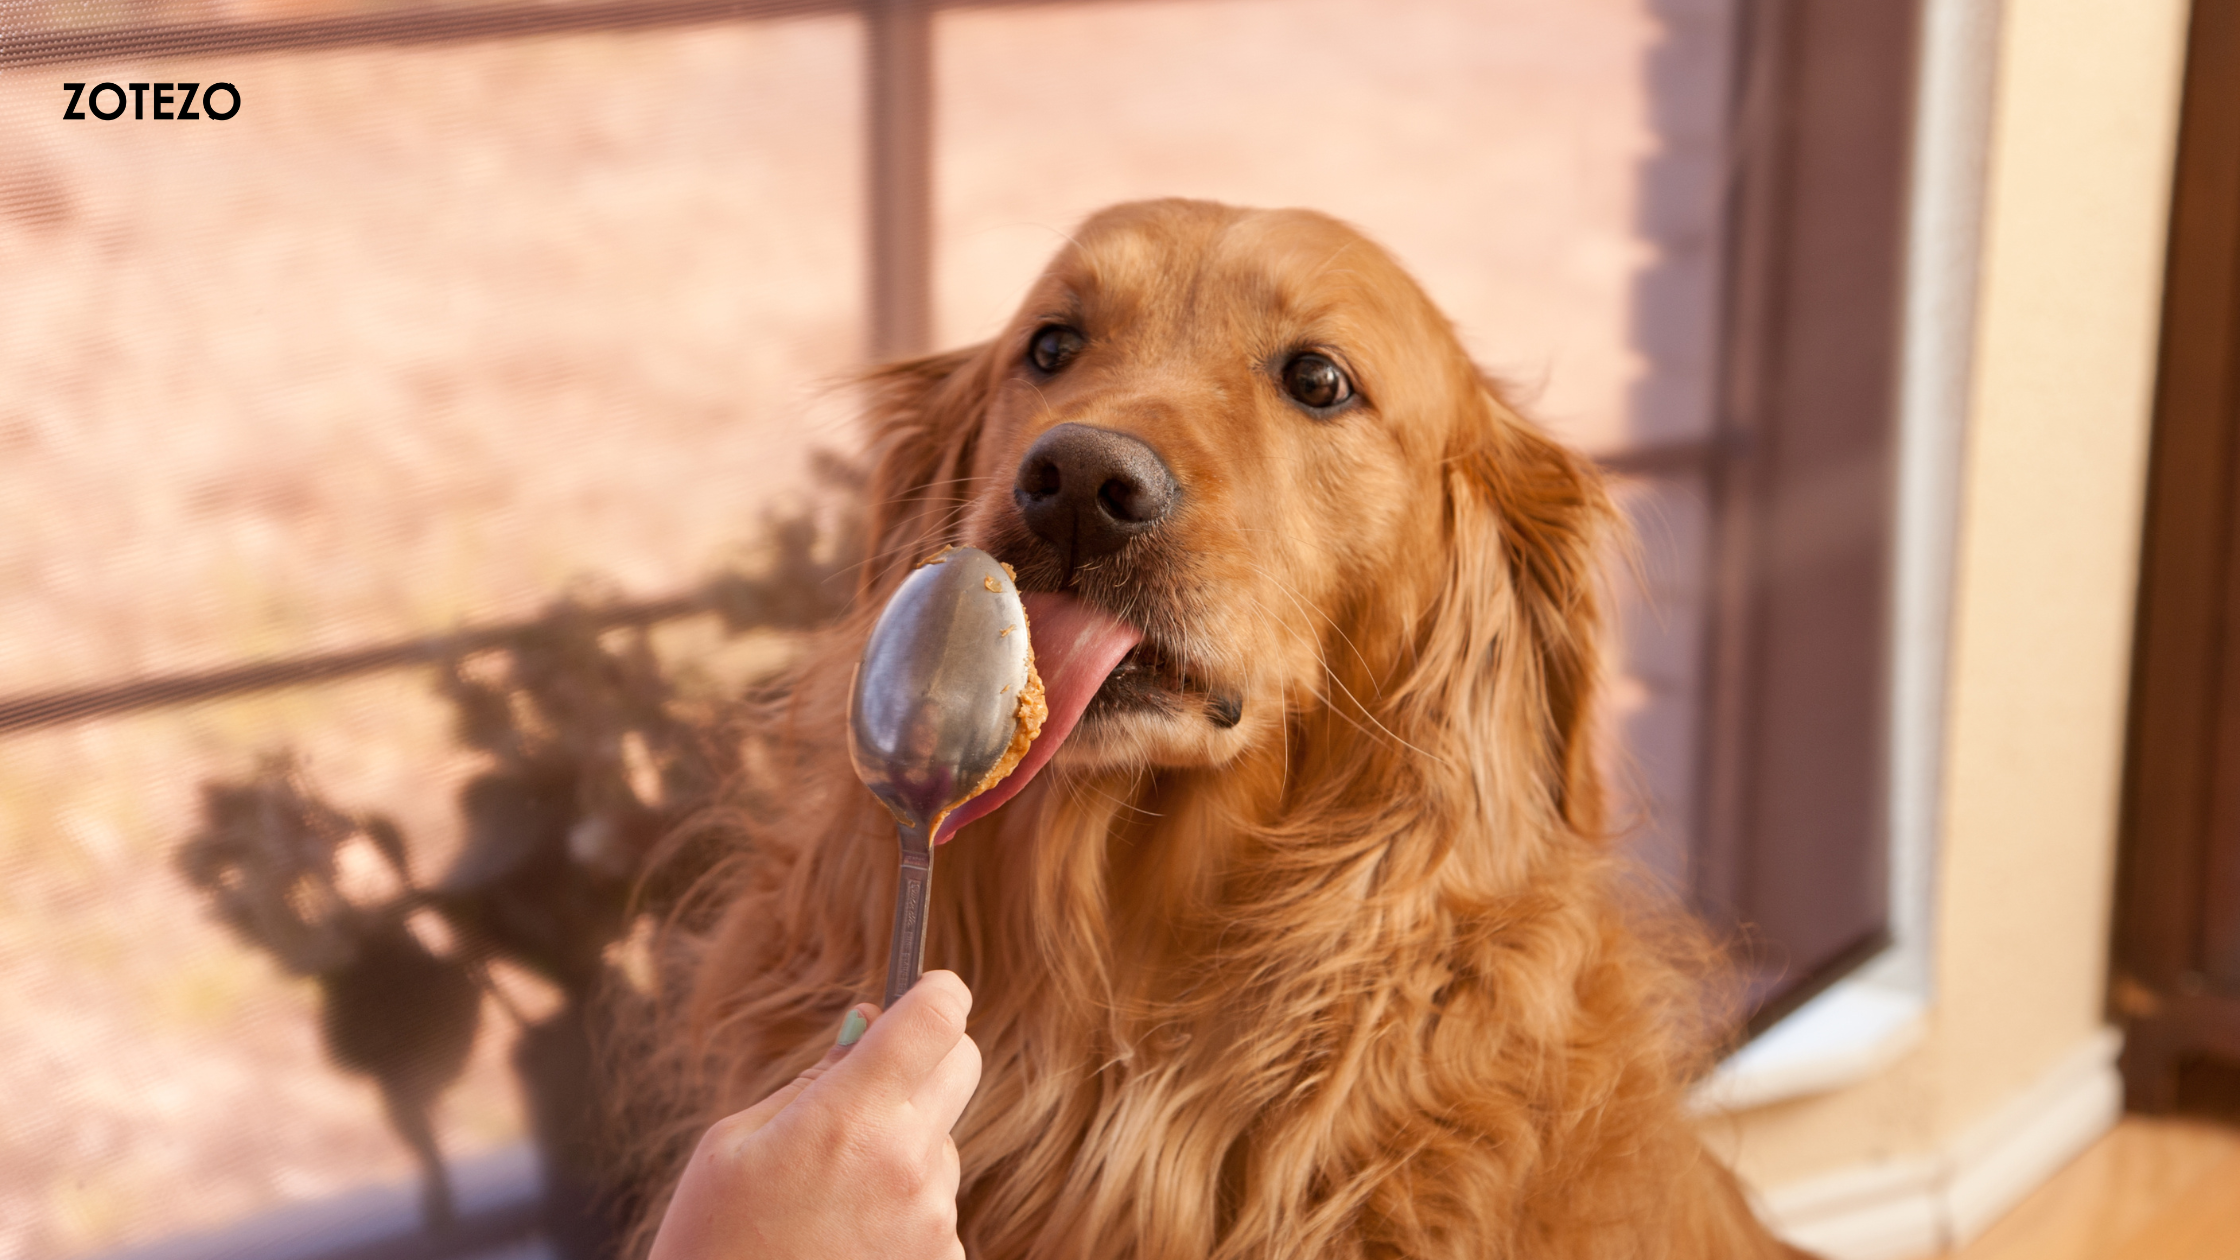 Peanut Butter For Dogs in USA